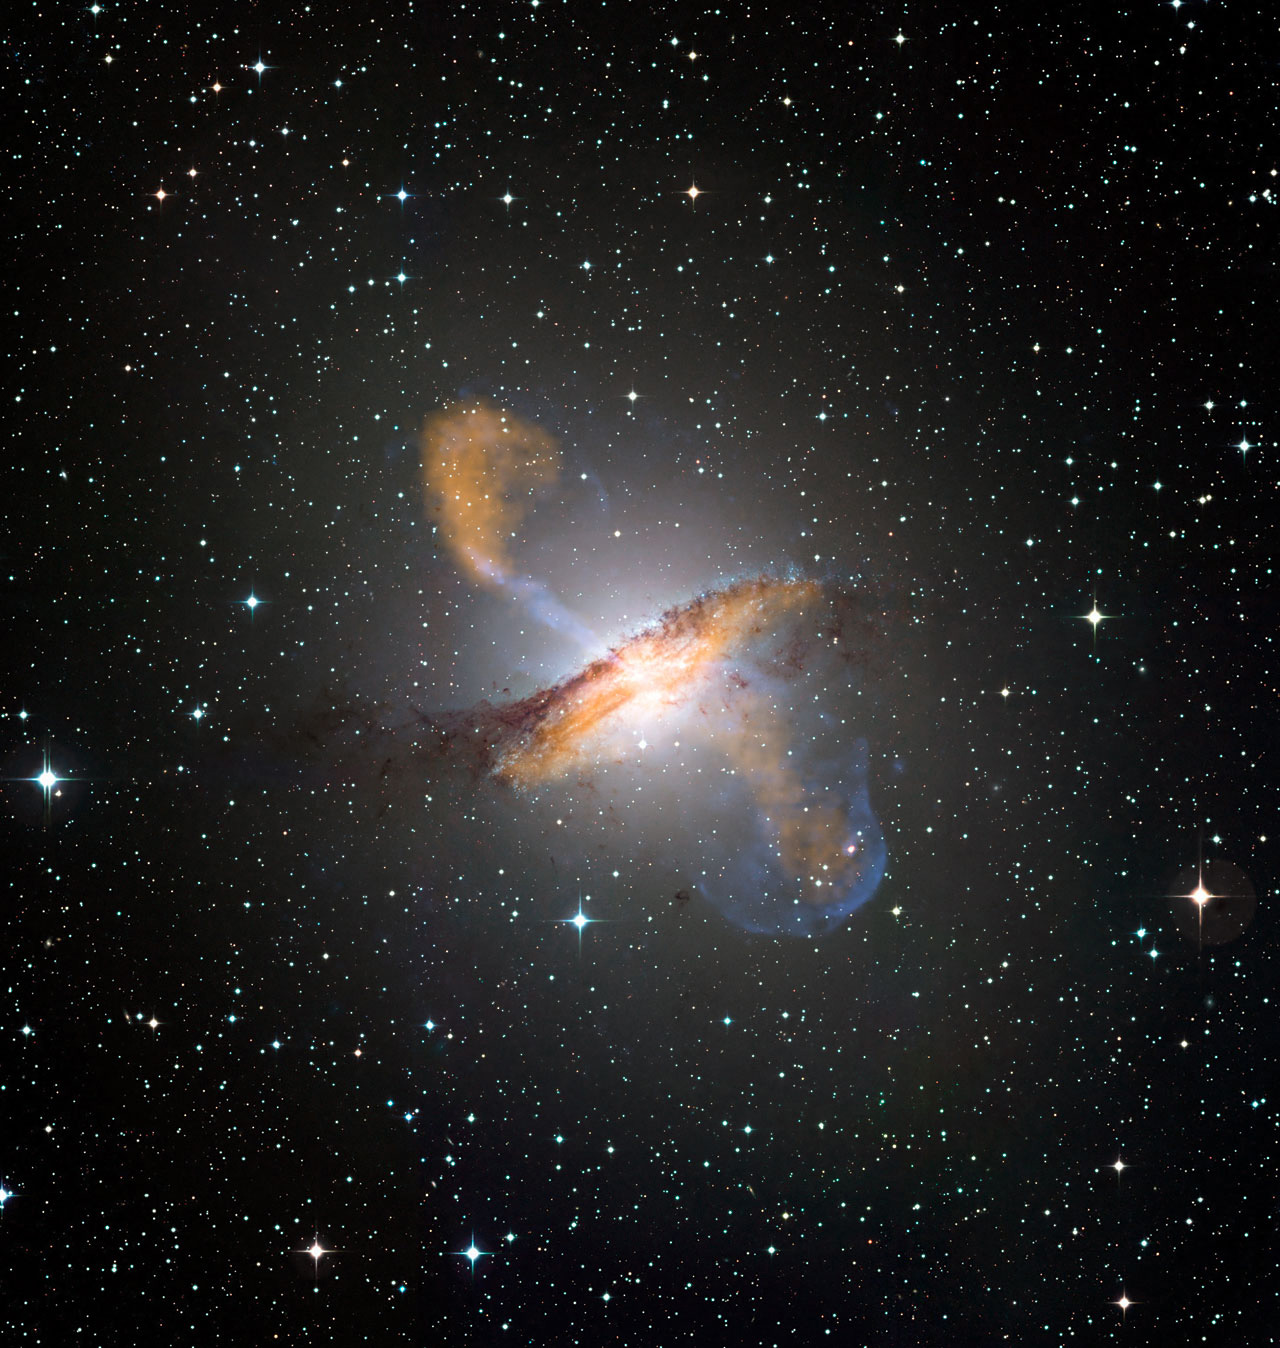 supermassive black hole in the nearby galaxy of Centaurus